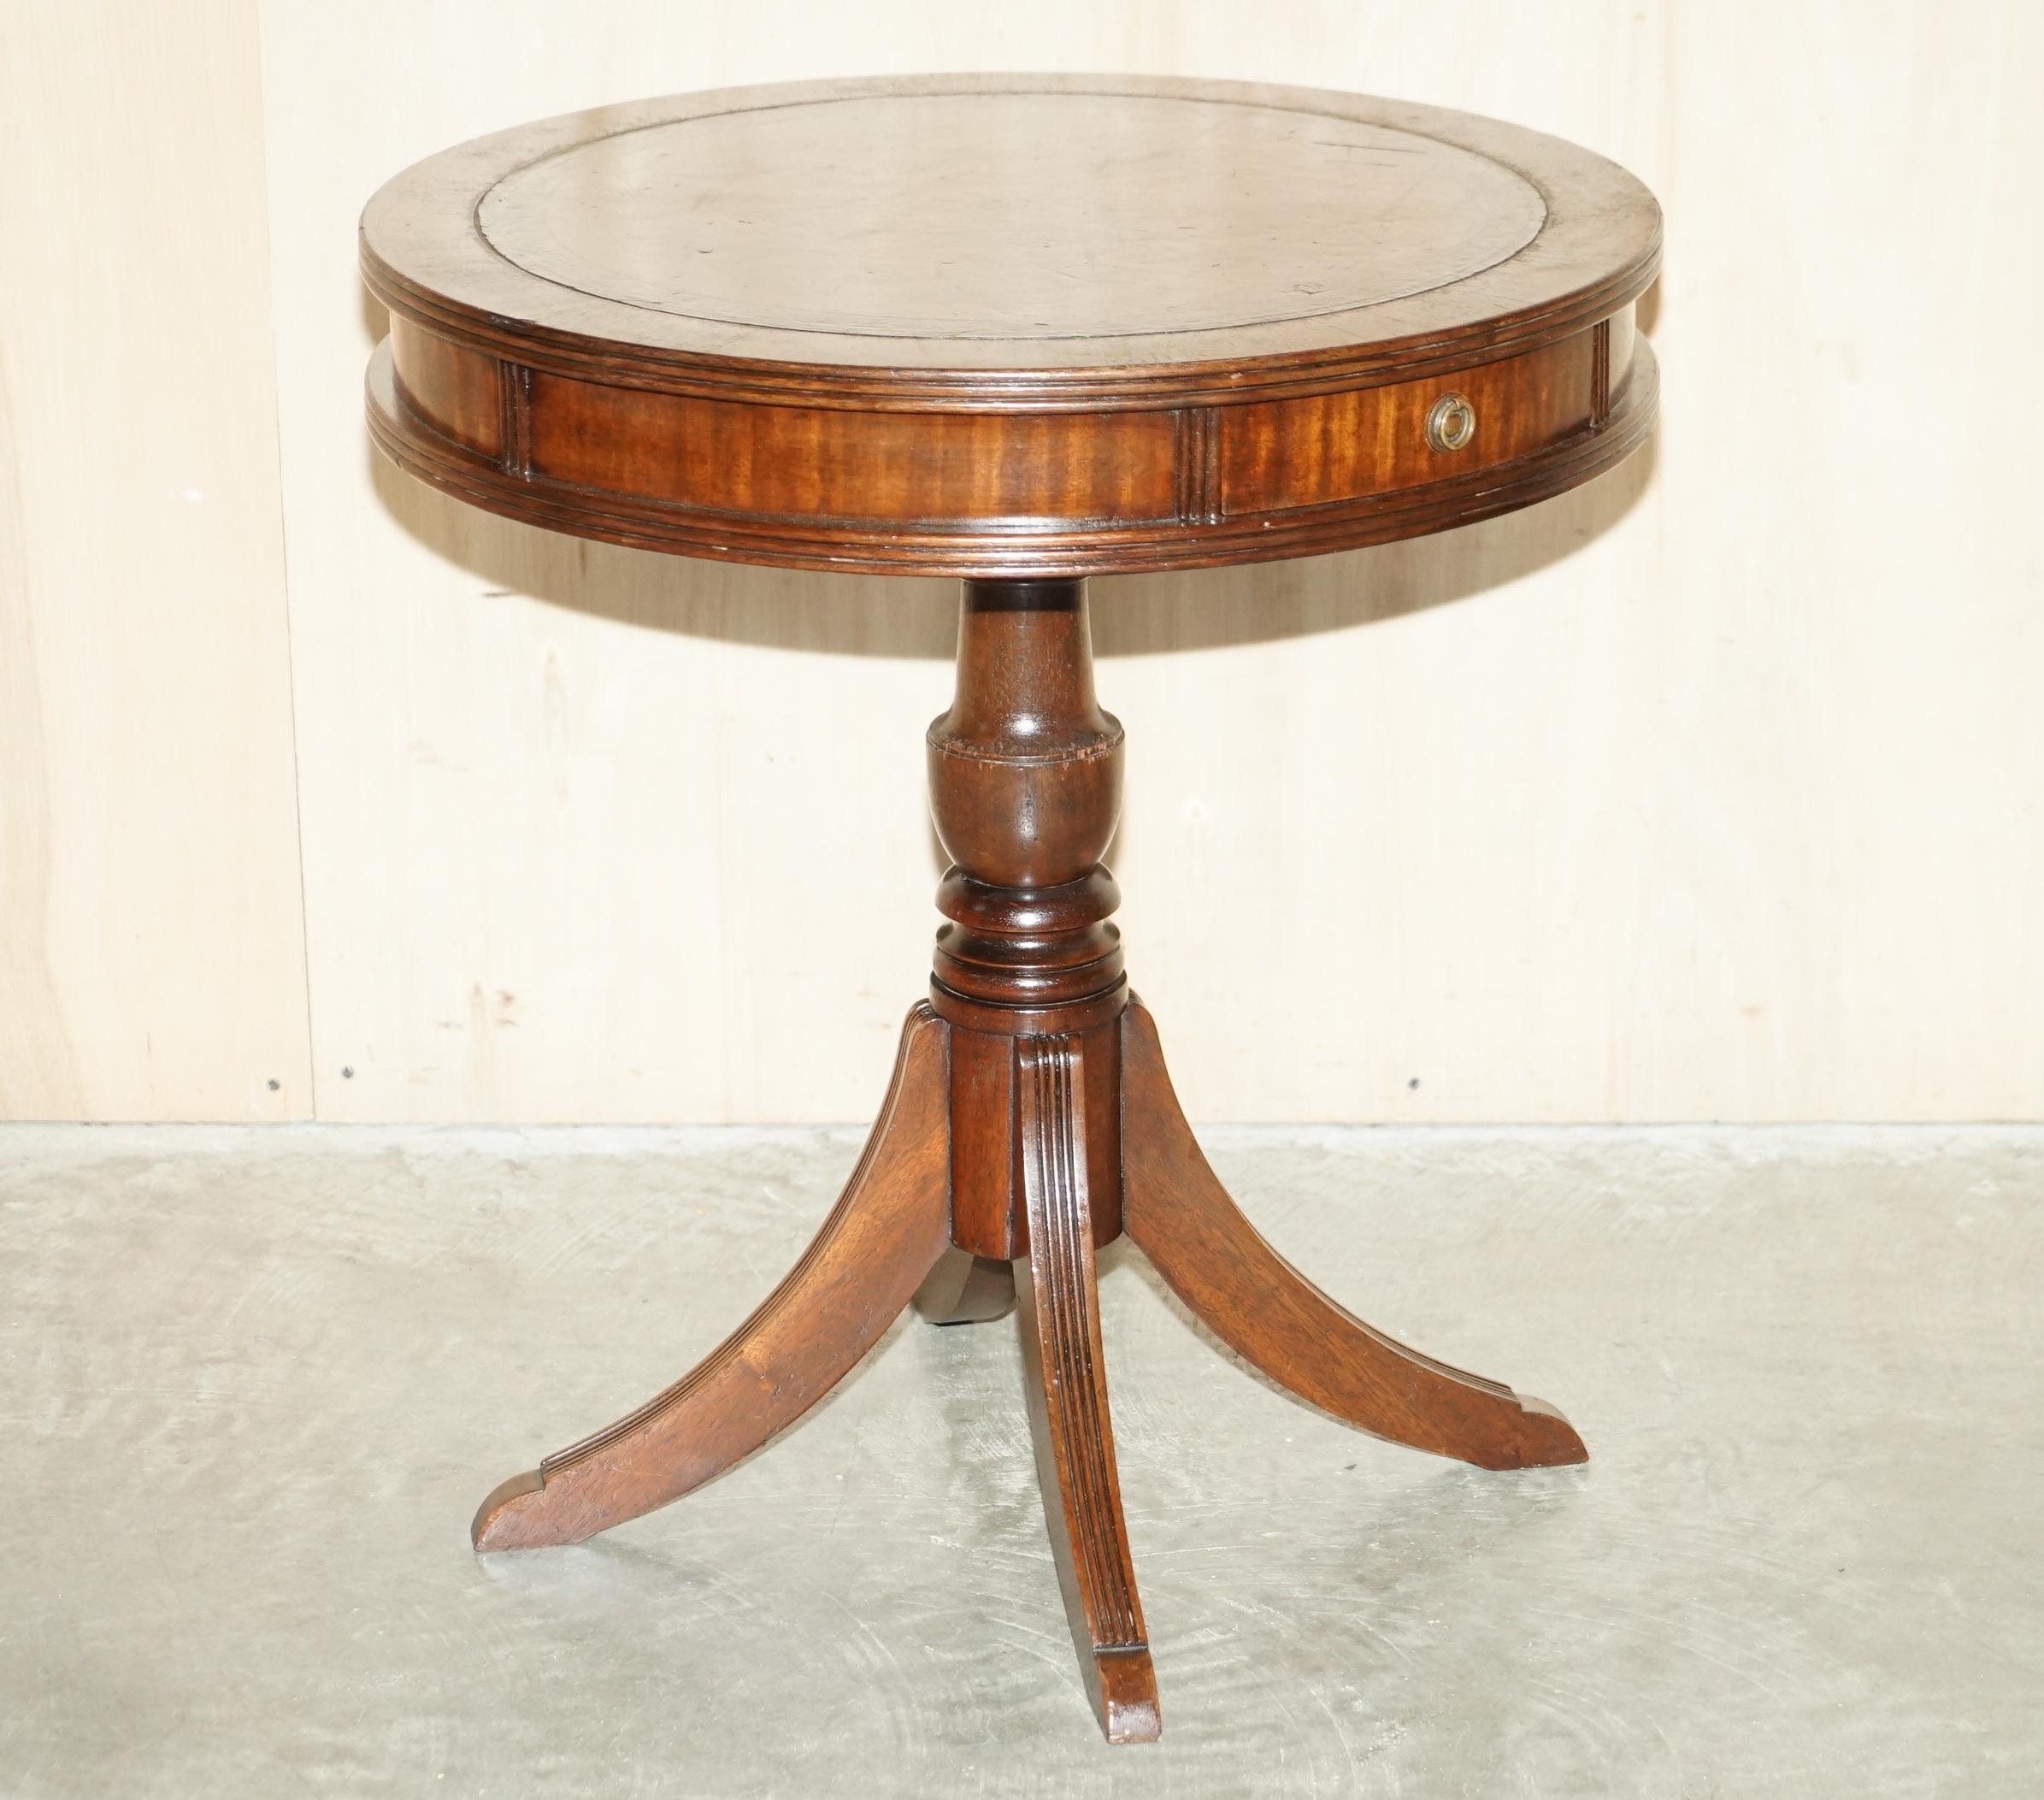 We are delighted to offer for sale this Regency style drum table with mahogany frame and hand dyed Cigar brown leather top 

A very good looking well made and decorative piece, ideally suited as a lamp wine or side table. It has been fully